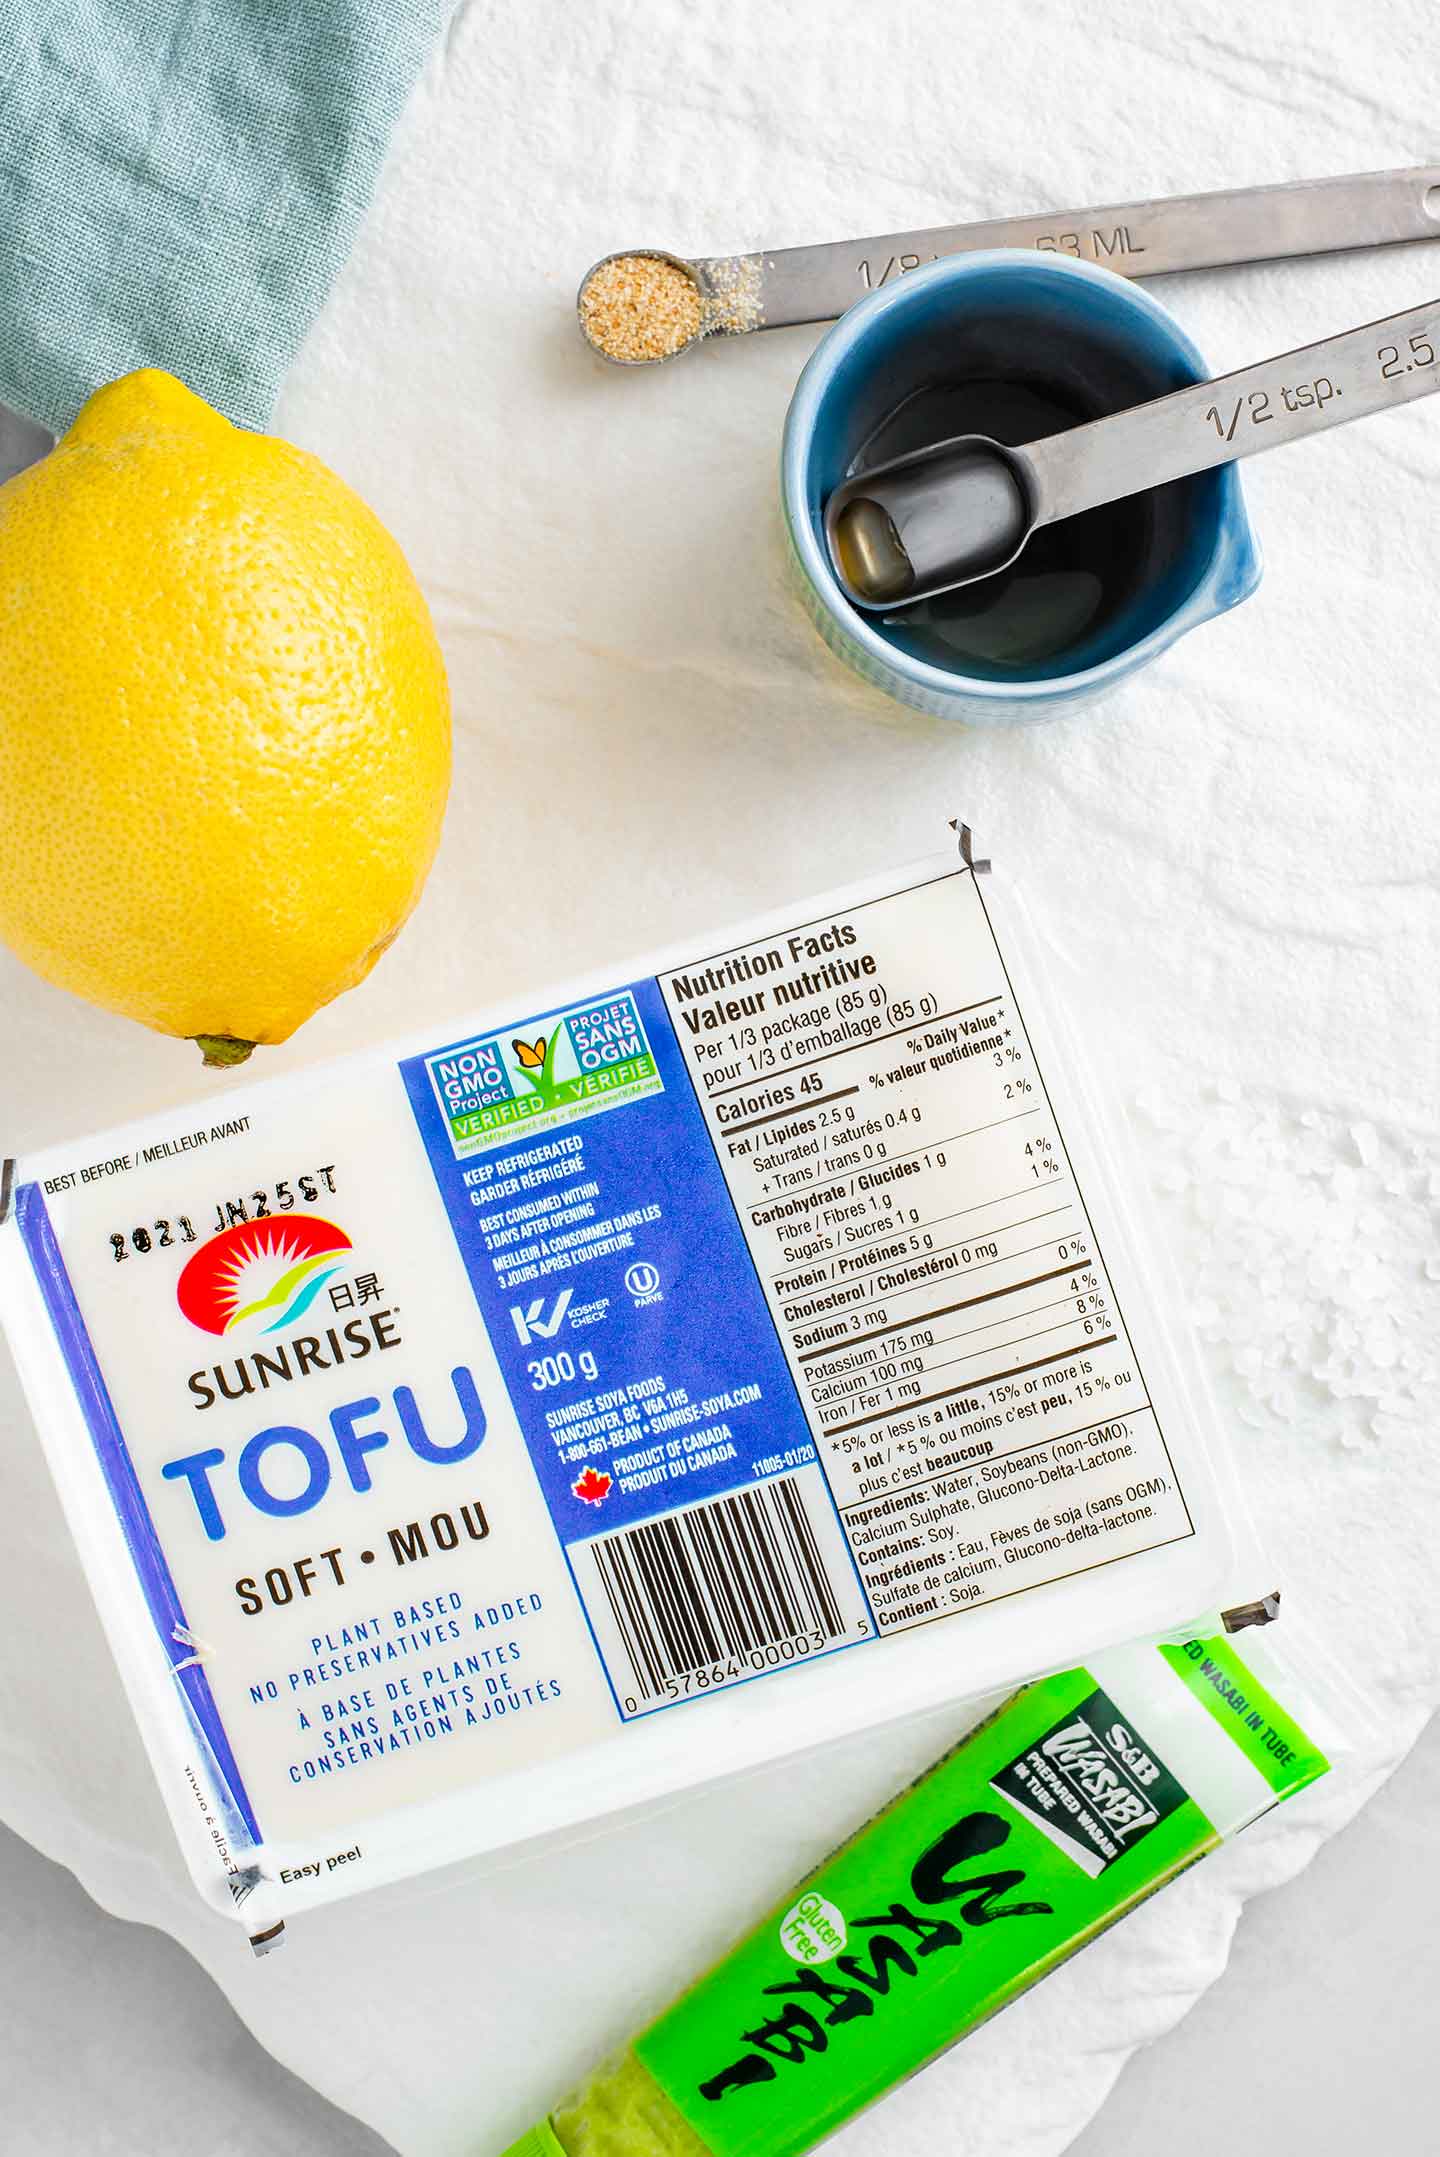 A package of silken tofu lays on a white tray with a tube of wasabi, a lemon, apple cider vinegar, coarse sea salt, and garlic powder.